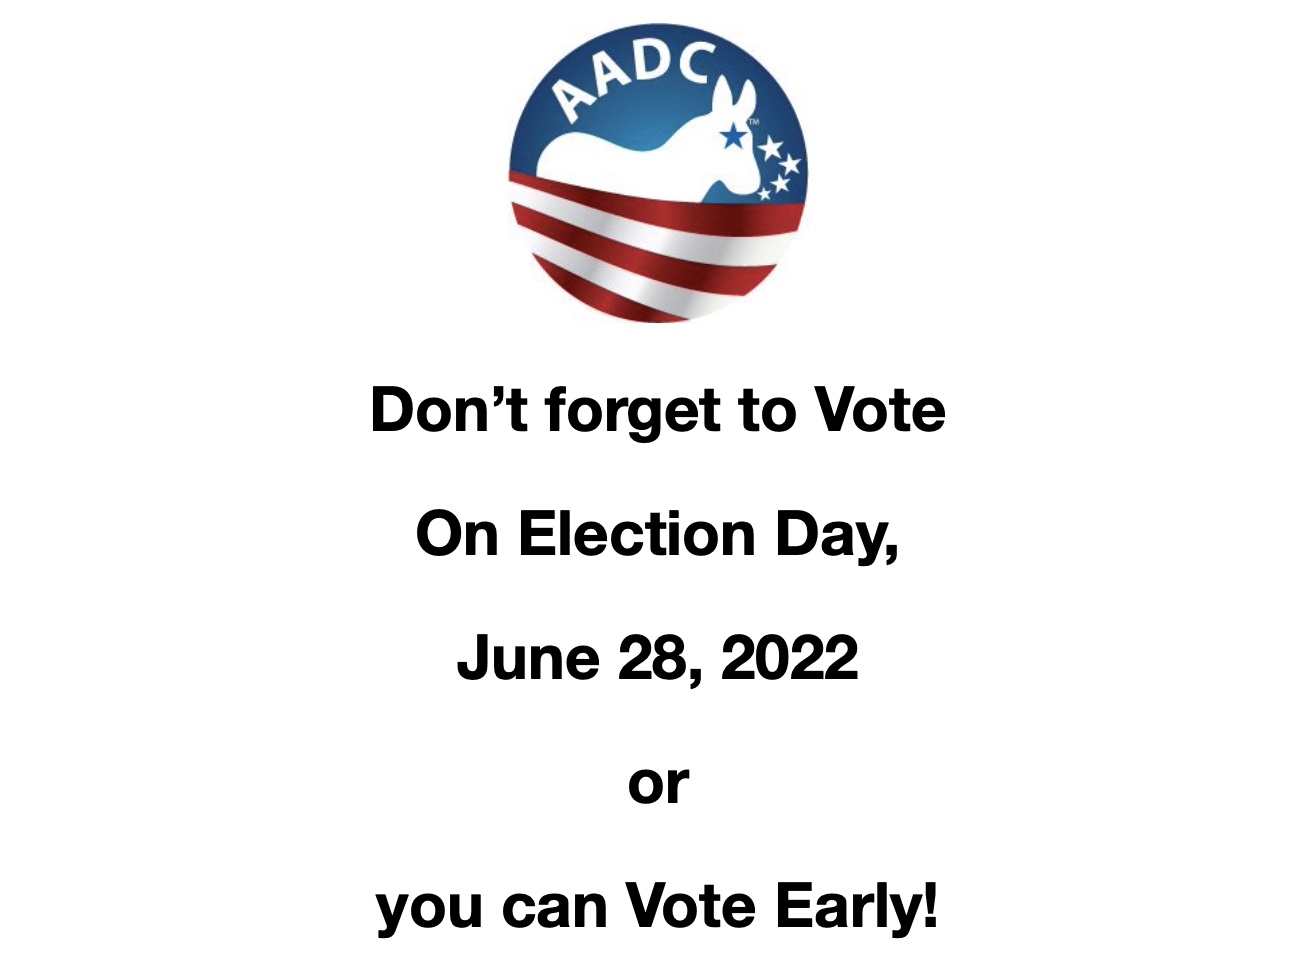 Vote Early June 28, 2022 election